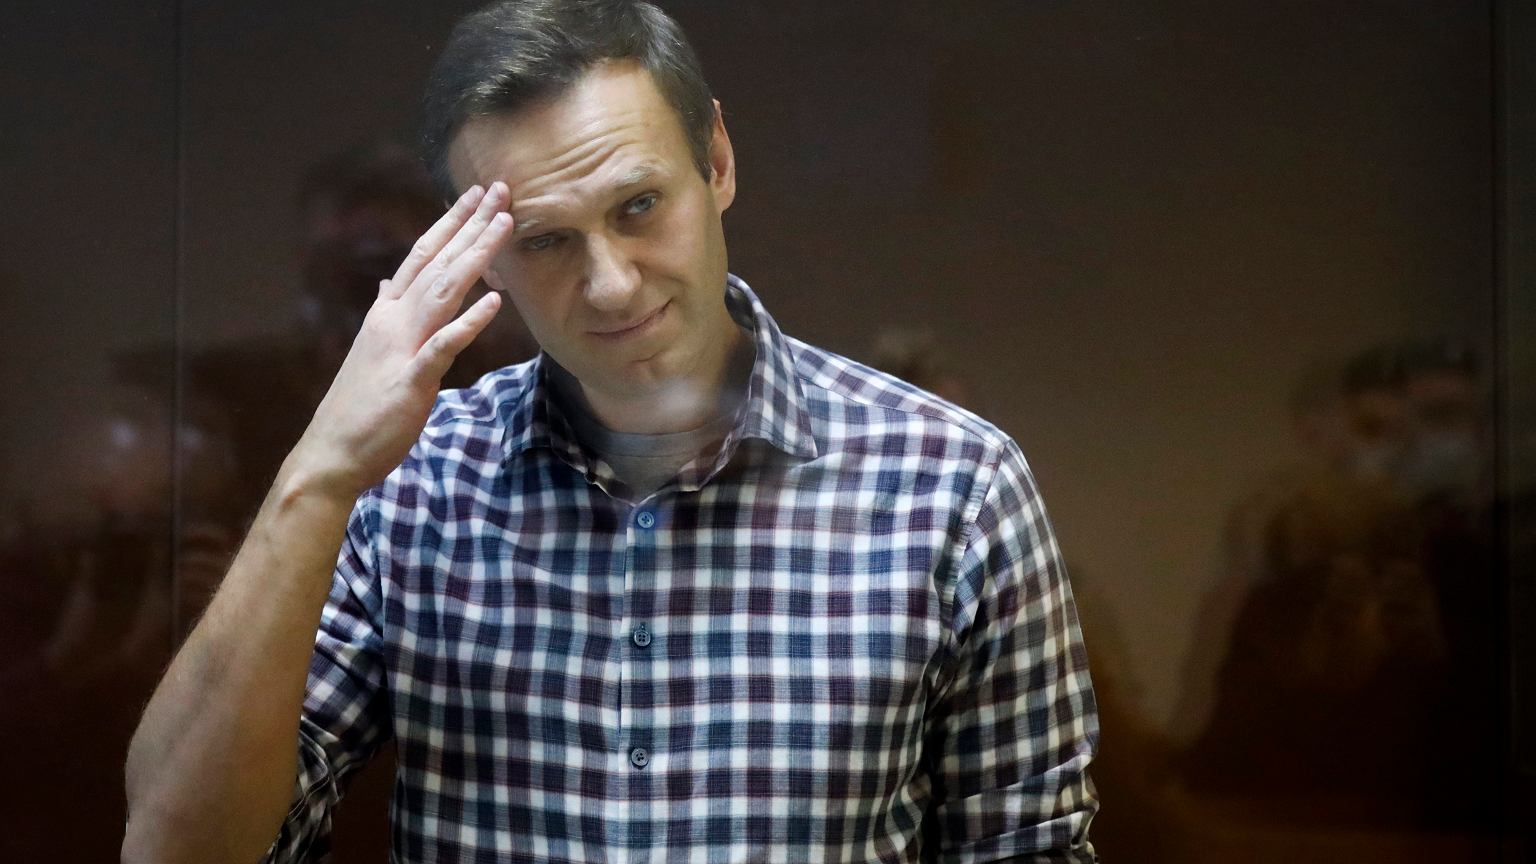 Pro-camp media published a recording supposed to present Navalny